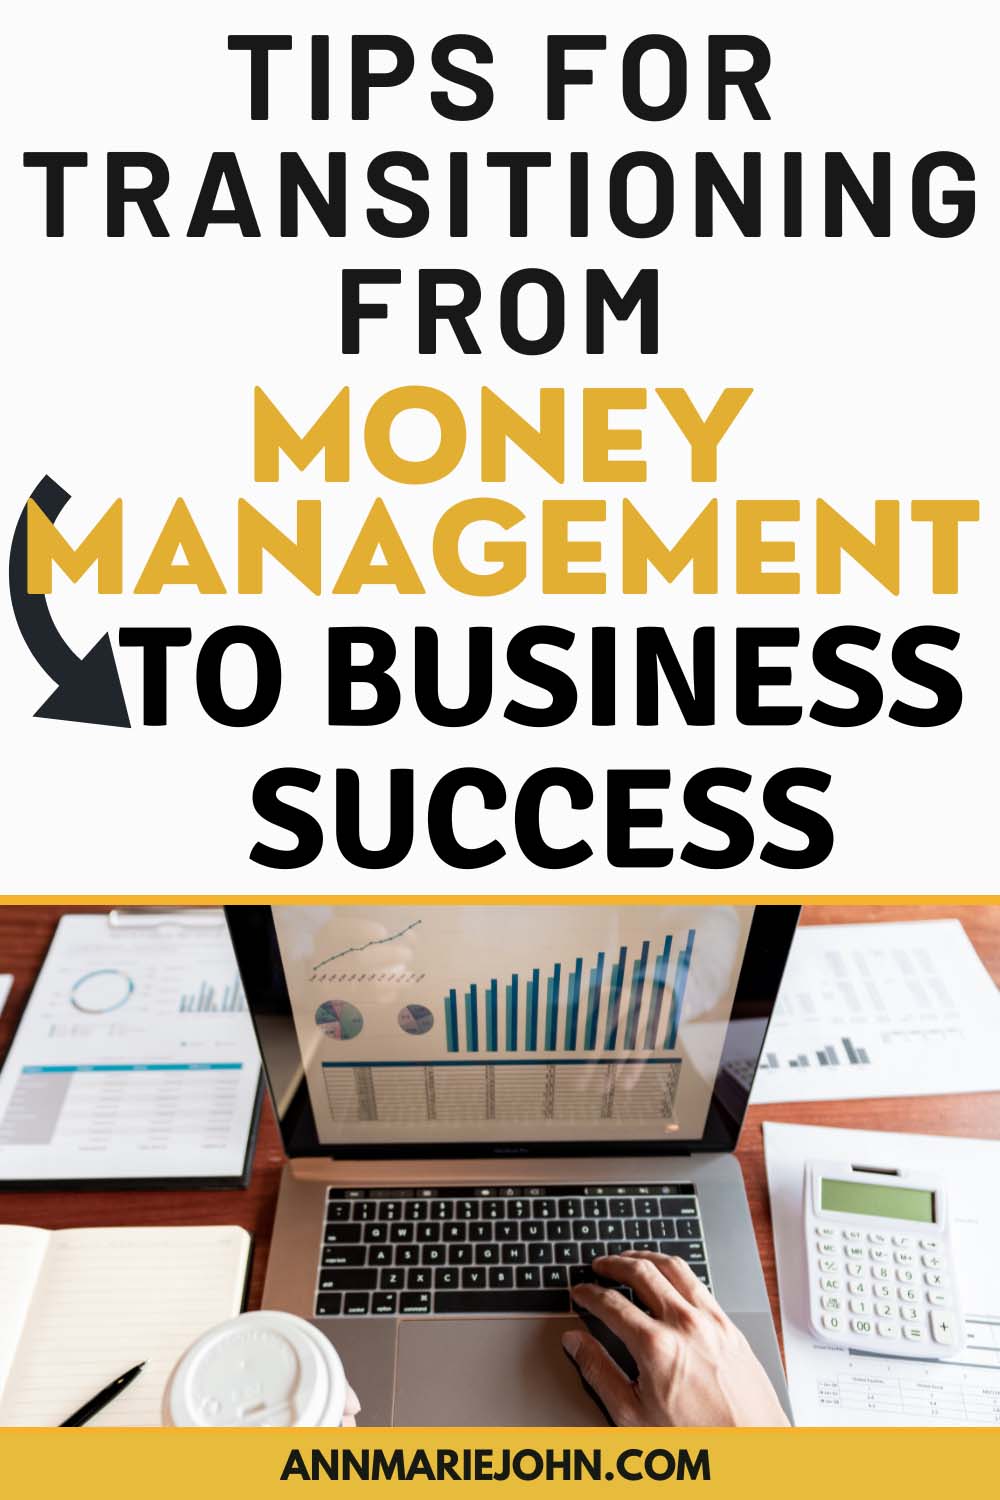 Tips for Transitioning from Money Management to Business Success